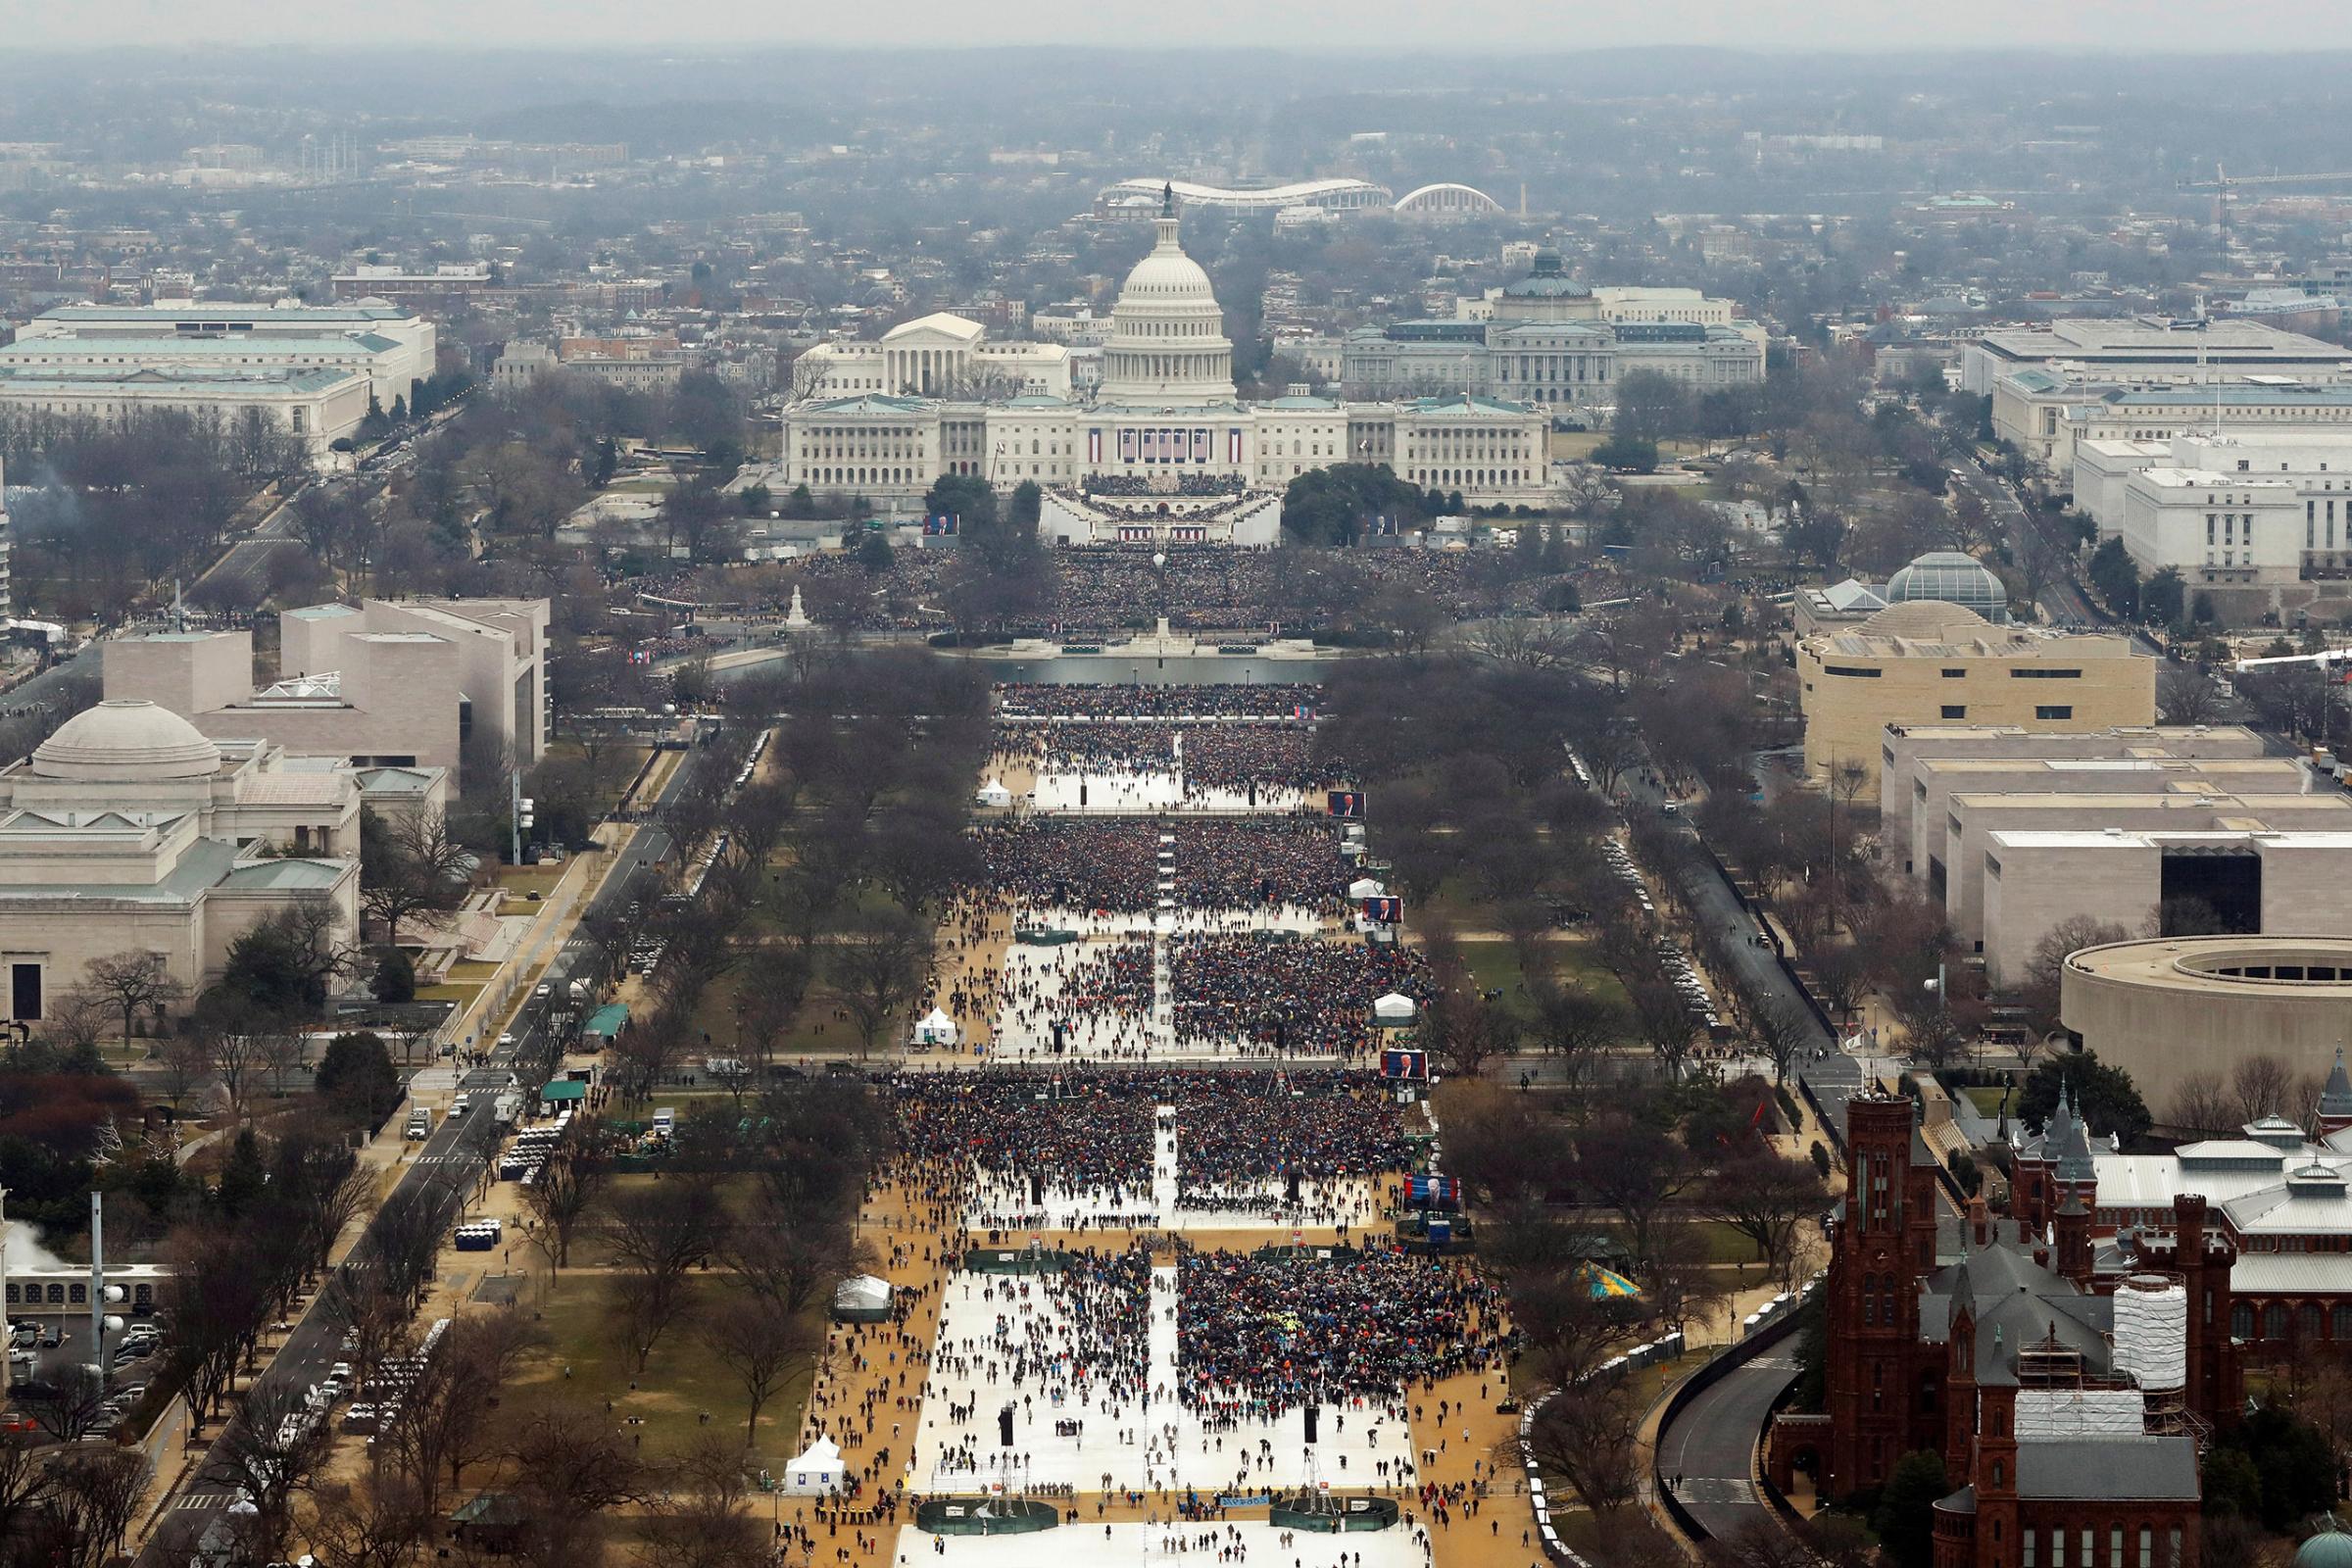 Attendees line the Mall as they watch ceremonies to swear in Donald Trump on Inauguration Day on Jan. 20, 2017 in Washington.